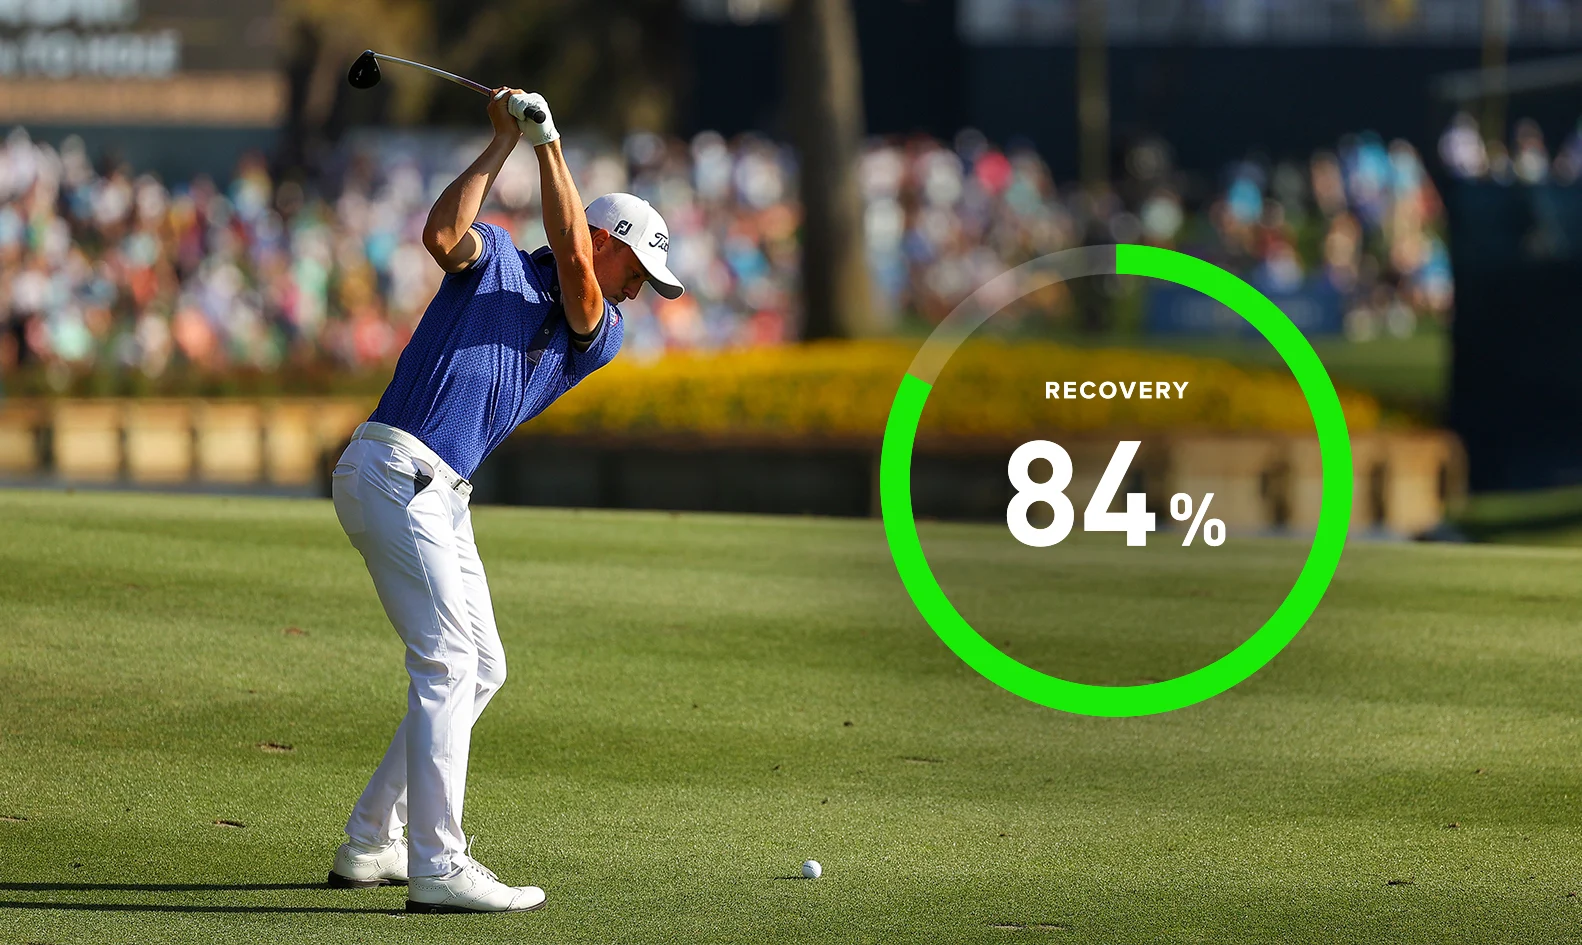 After waking up with an 84% WHOOP recovery, Justin Thomas shot an 8-under 64 on the Saturday of his Players Championship win.